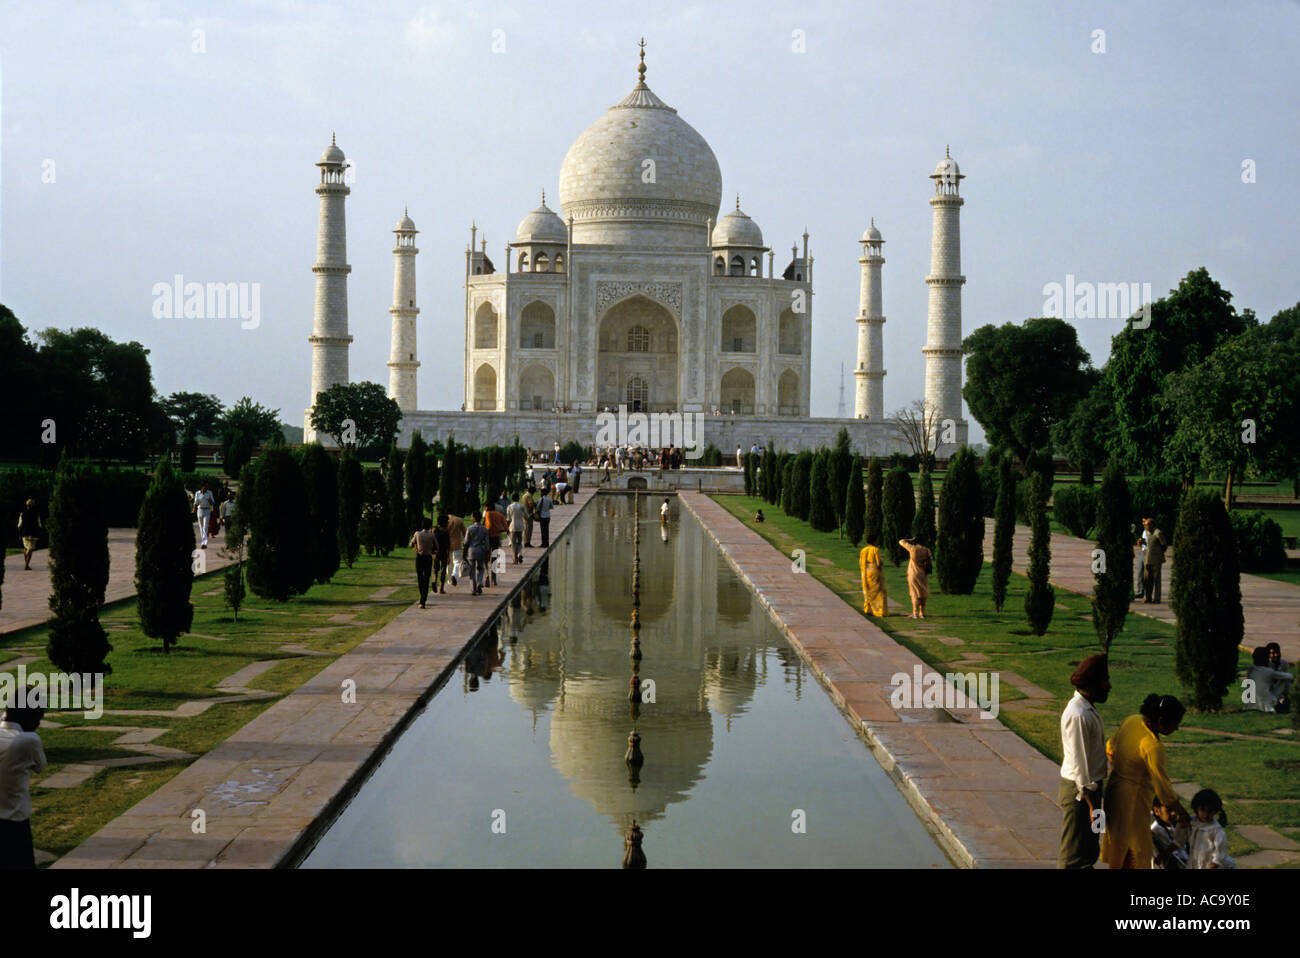 Tourists visiting the Taj Mahal, Agra, India in the early evening Stock Photo